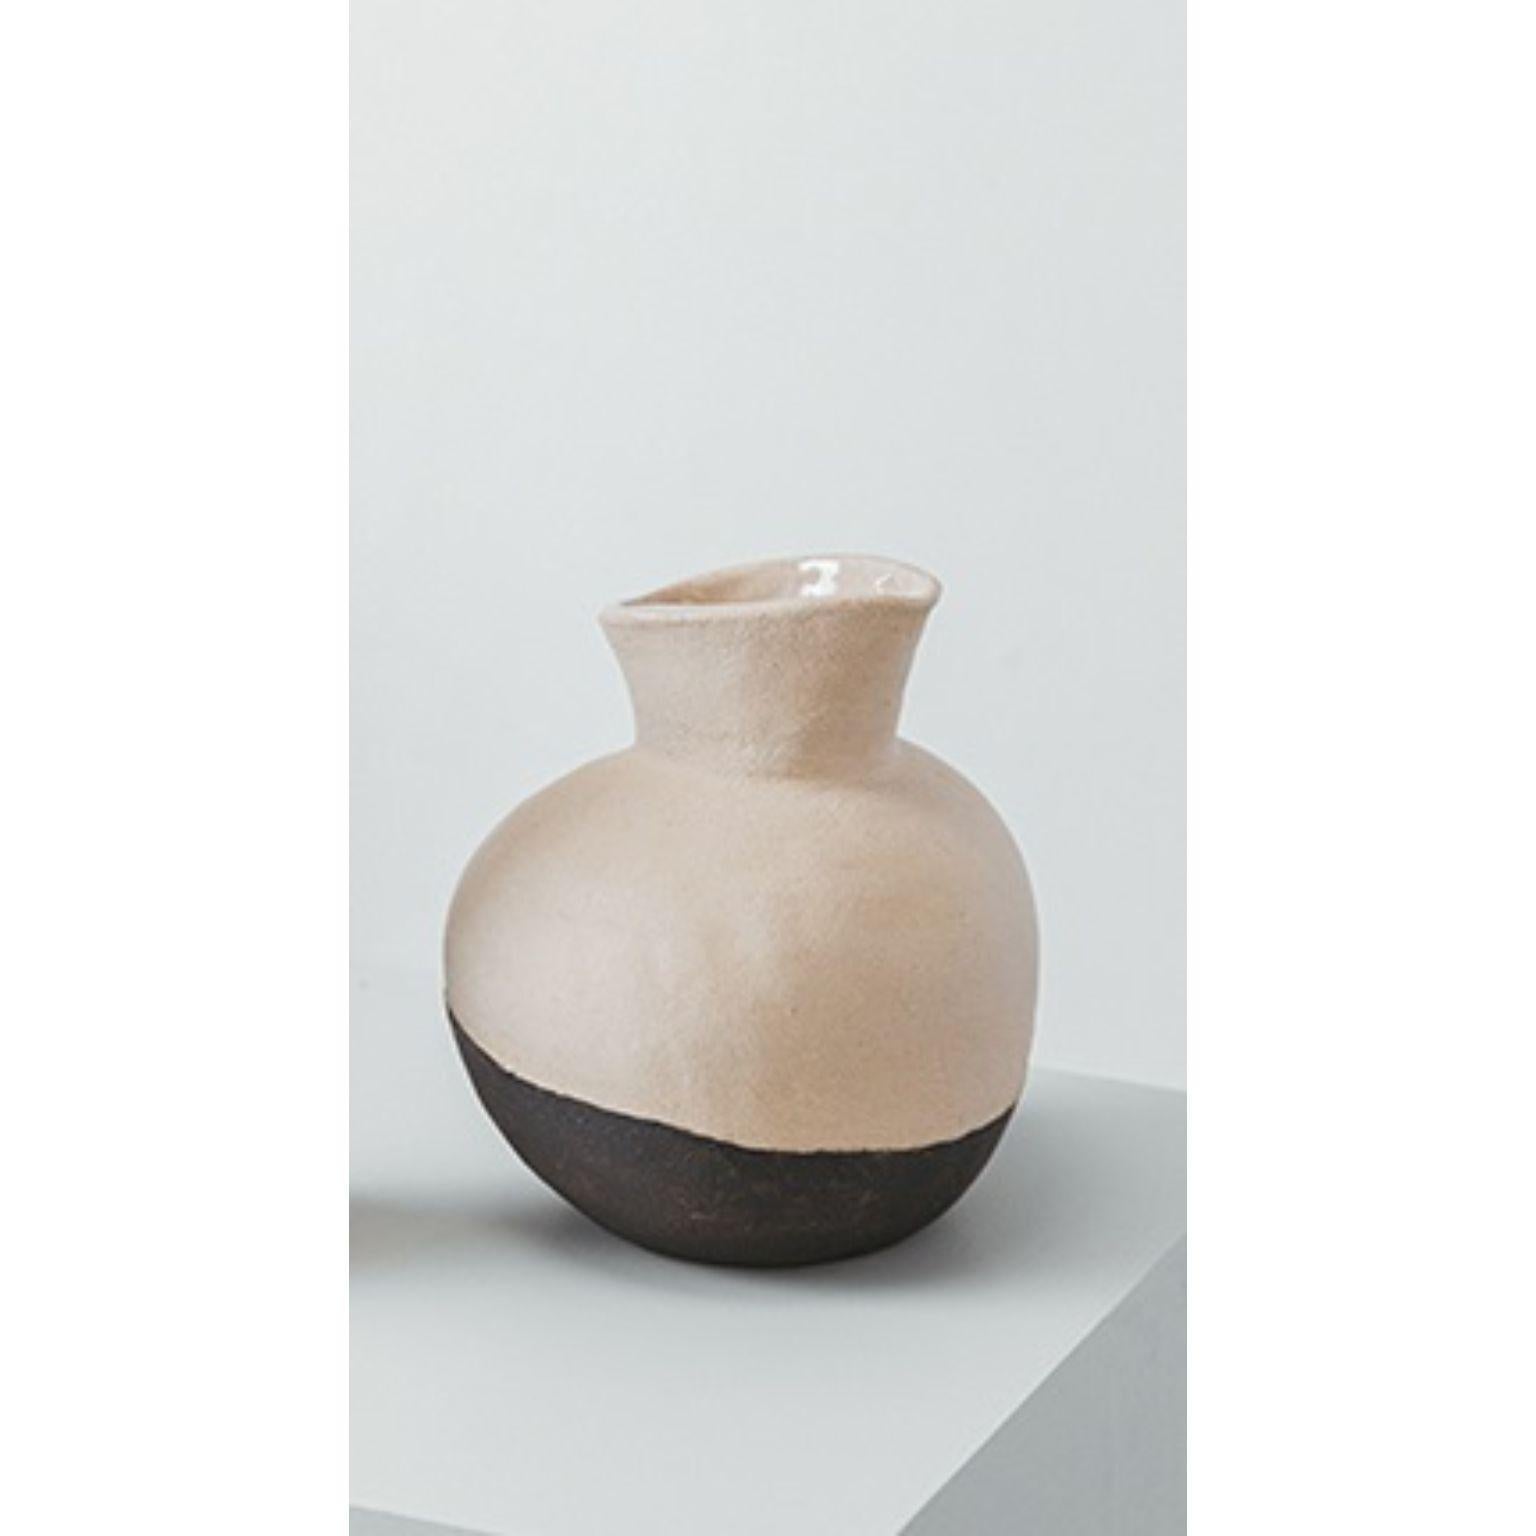 Deméter Water Jar by Cuit Studio
One of a Kind.
Dimensions: Ø 16 x H 22 cm.
Materials: Natural and black stoneware.

Mix of natural and black stoneware, glazed inside with transparent color. Water & food safe. Handmade in Barcelona. Also available